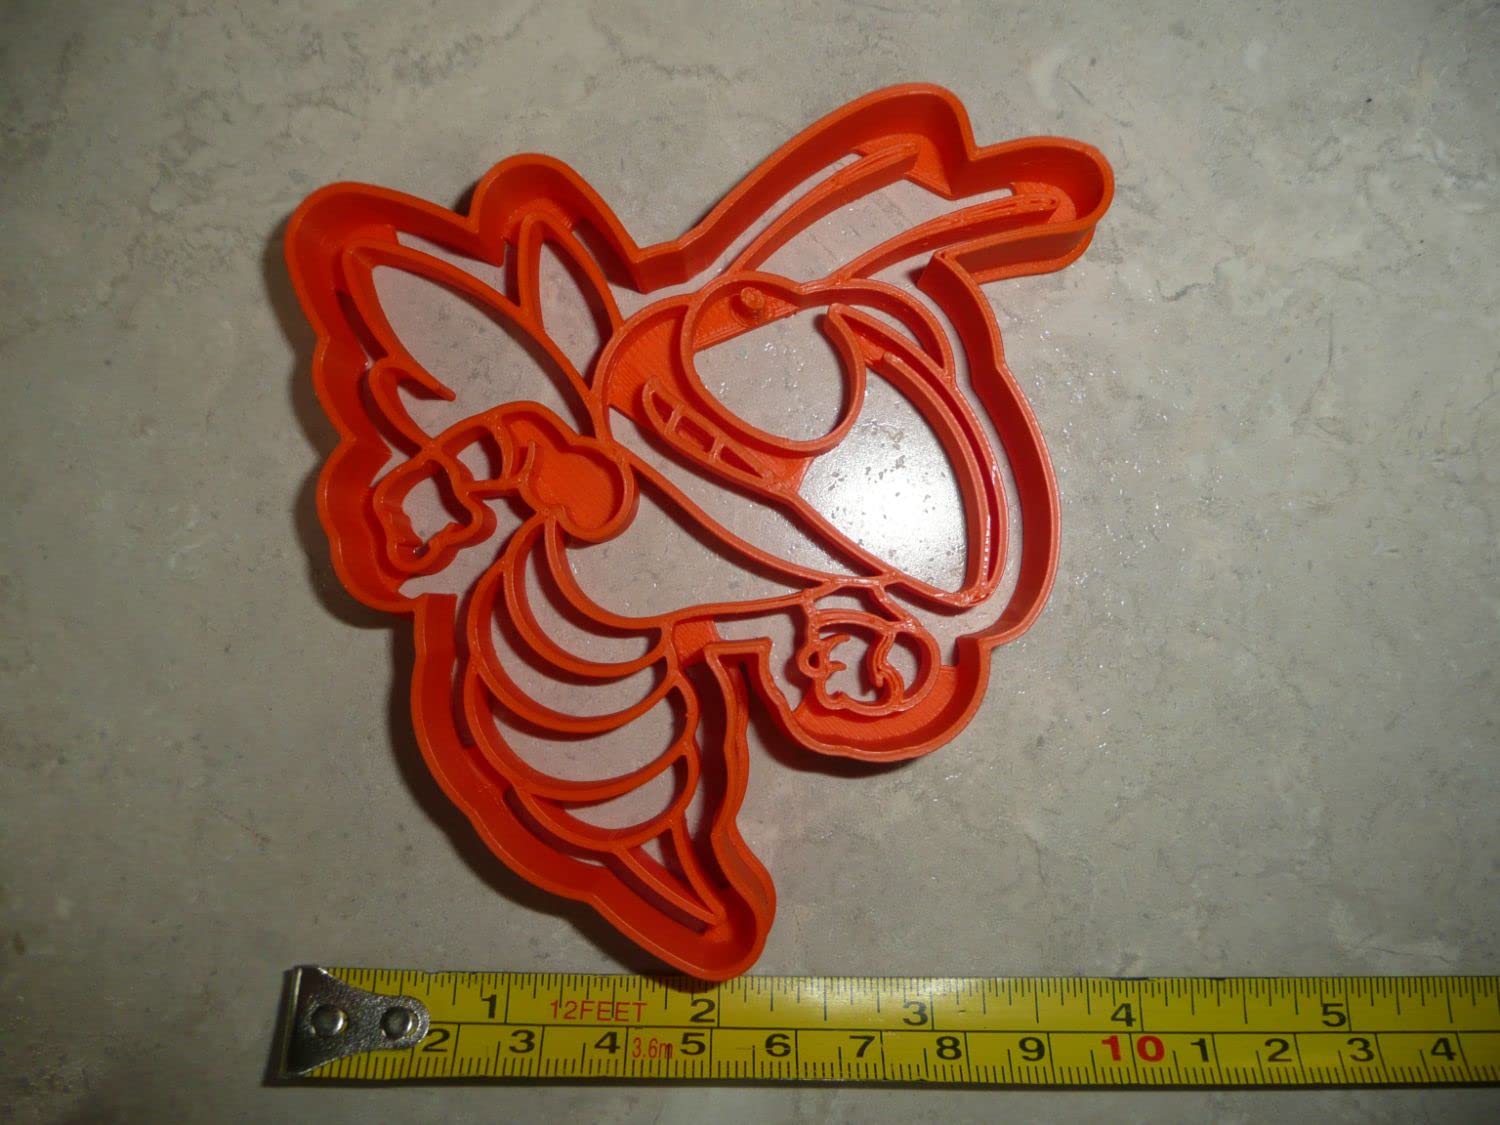 YELLOWJACKET WASP STINGING BEE DETAILED COOKIE CUTTER MADE IN USA PR4607